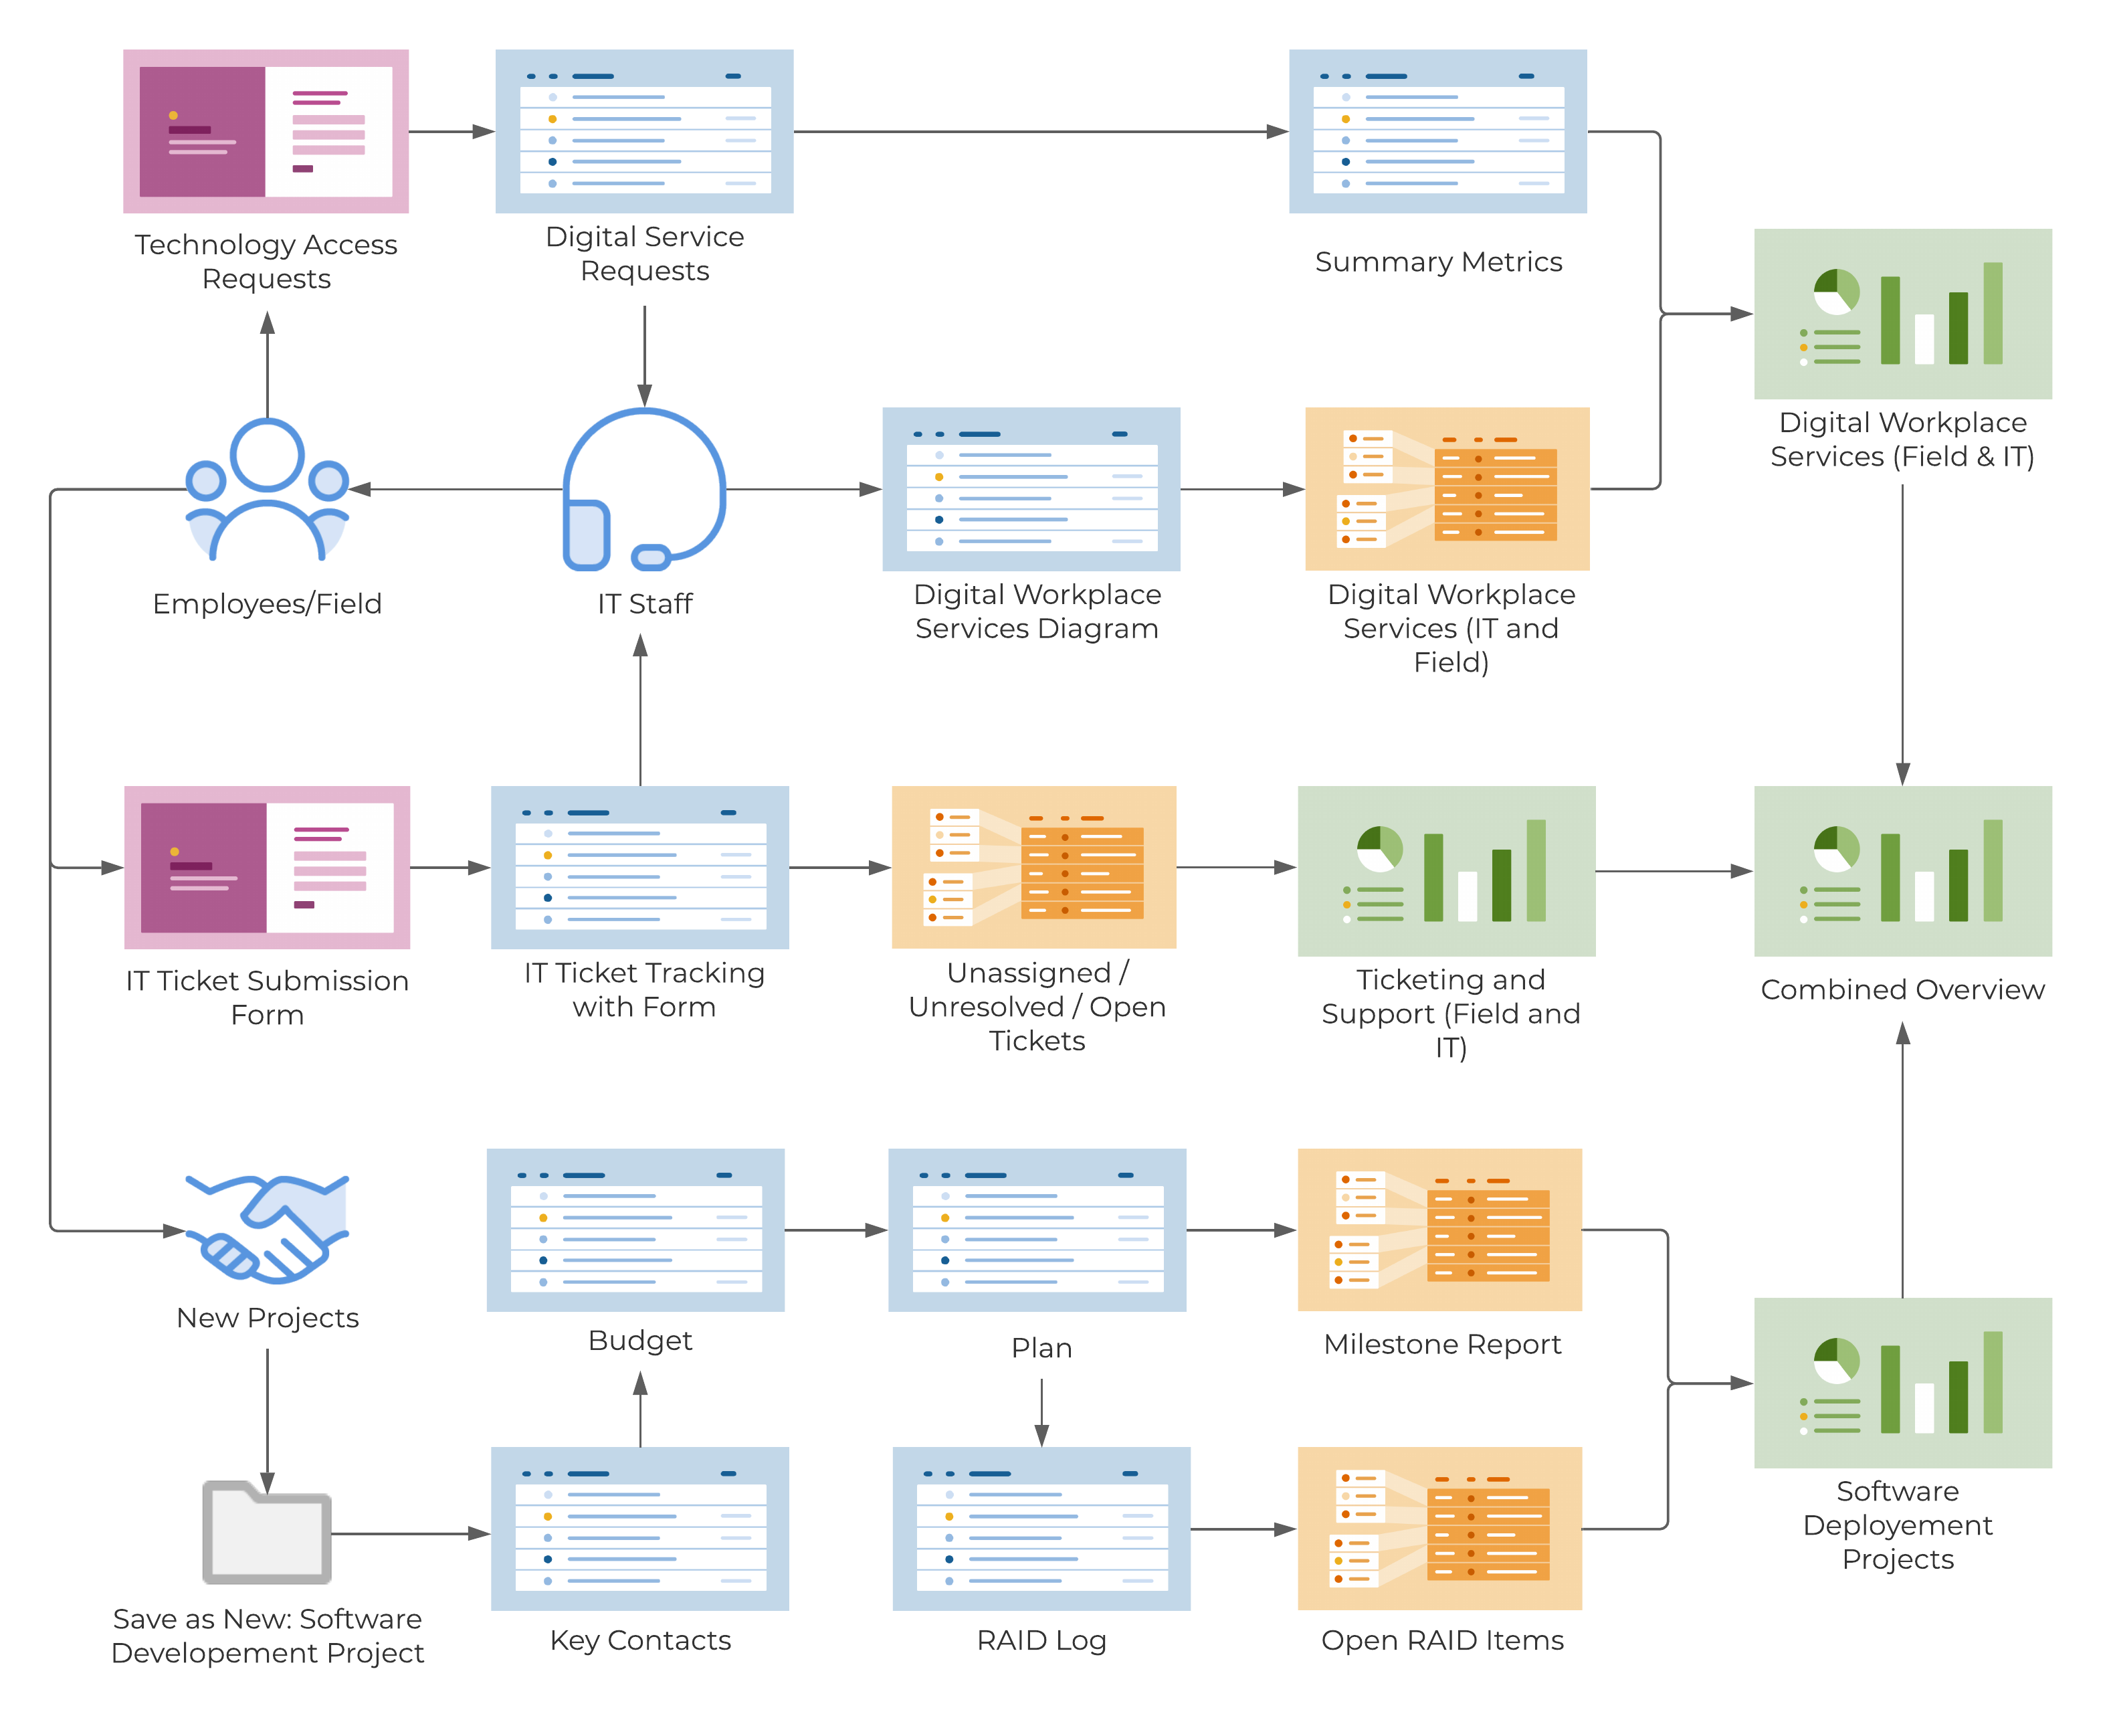 Template Set Flow Chart - IT Operations for Remote Workforce